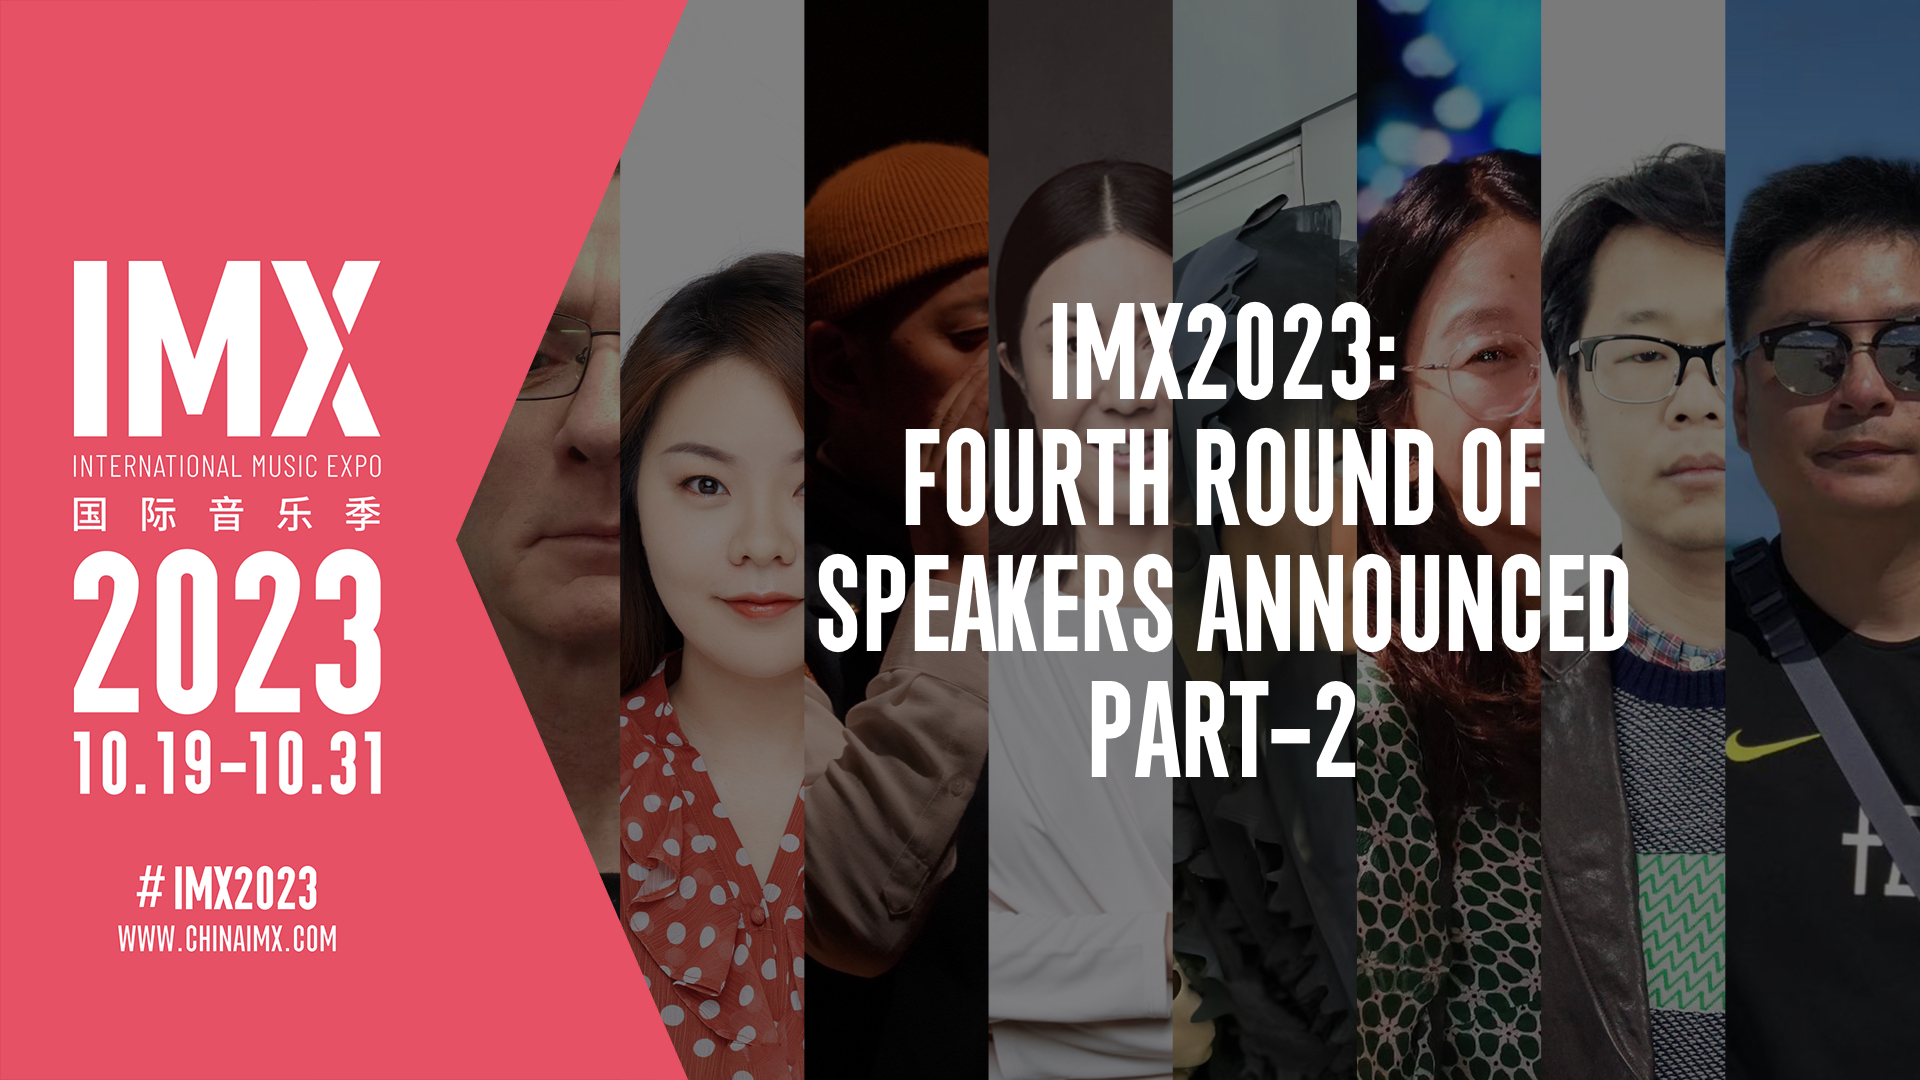 IMX 2023 Fourth Round of Speakers Part 2